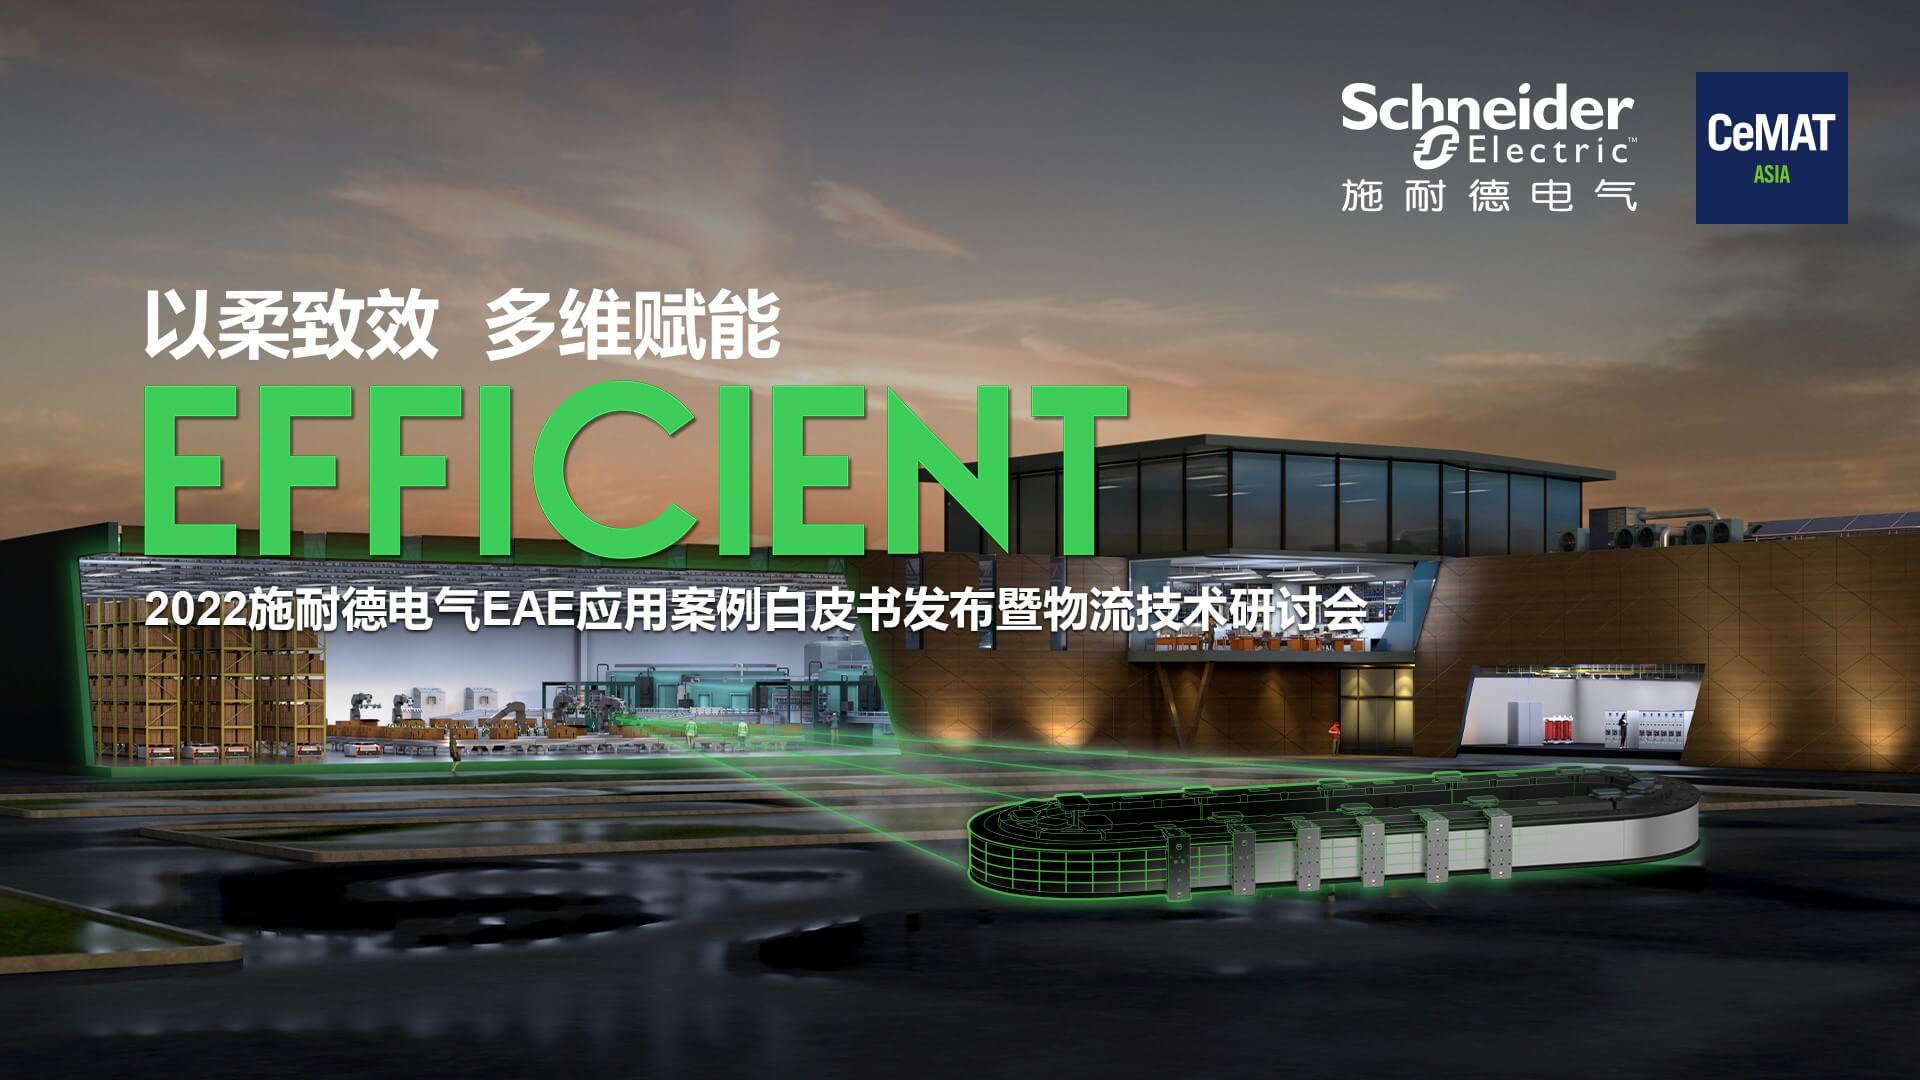 Empower Schneider Electric with softness, efficiency and multi-dimensionality to reveal the new development trend of the logistics industry in the future